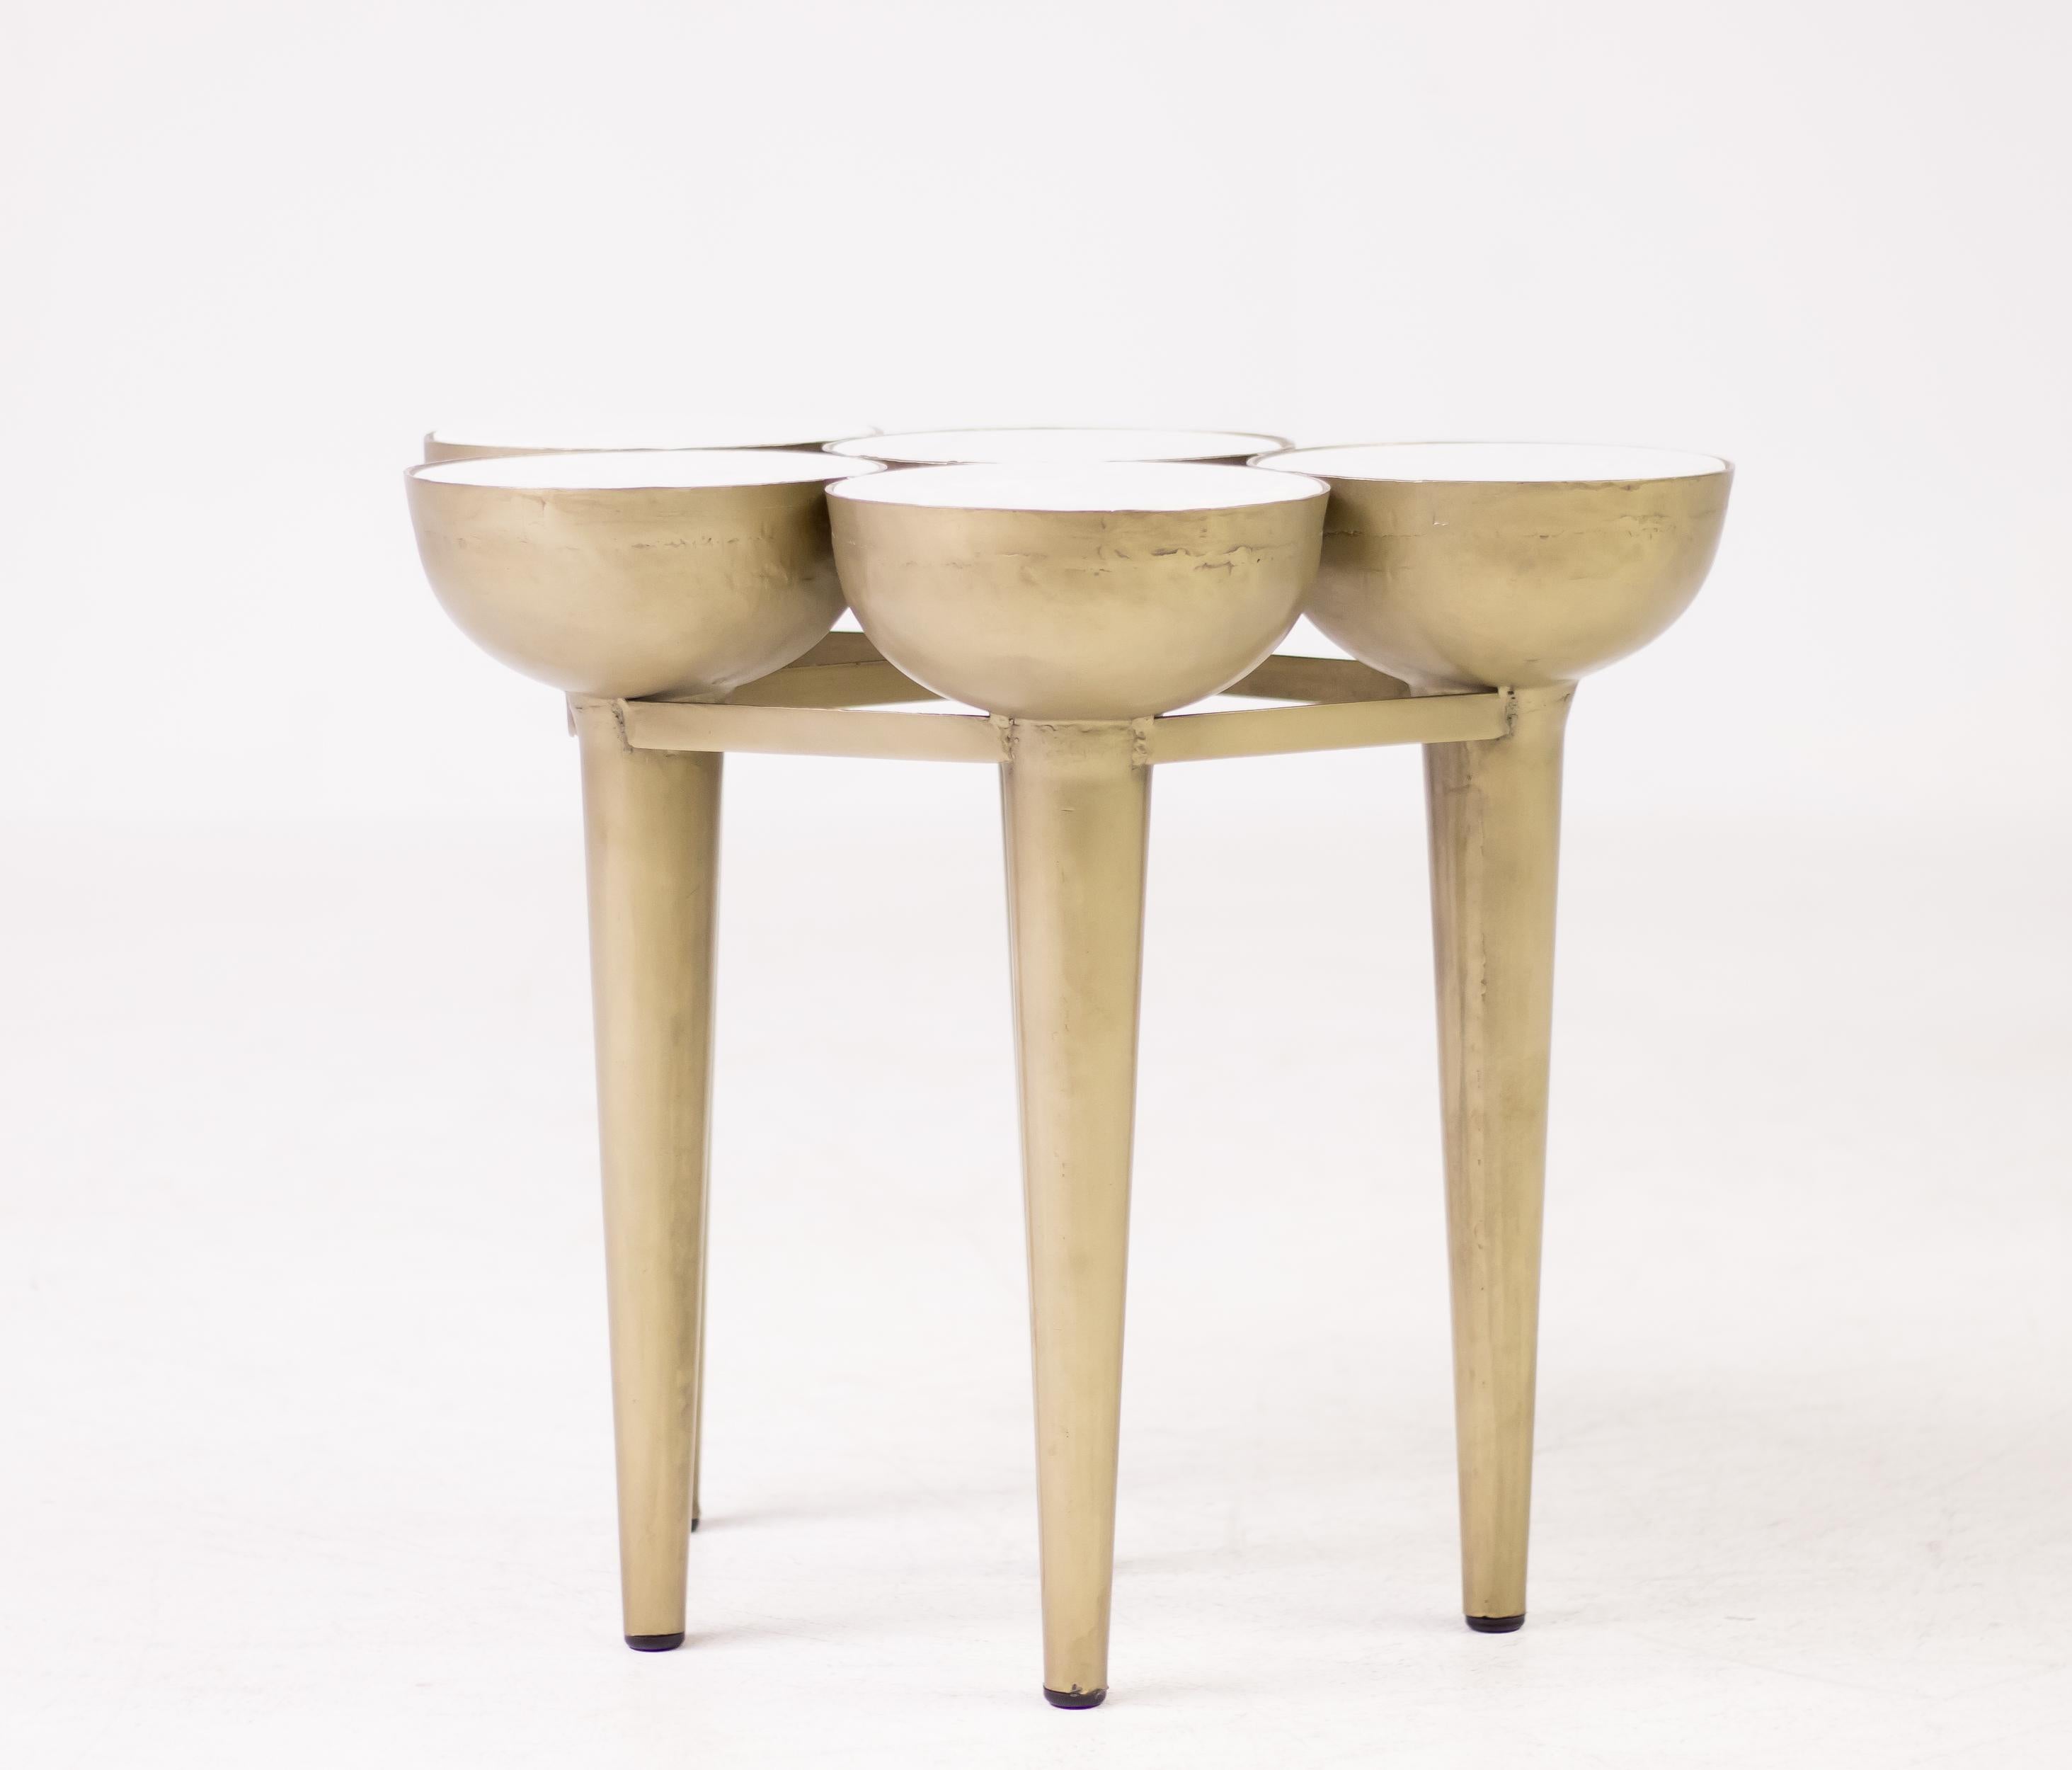 Unique side table composed of five torch shaped gold lacquered metal elements inserted with round Carrara marble tops.
Great conversation piece!